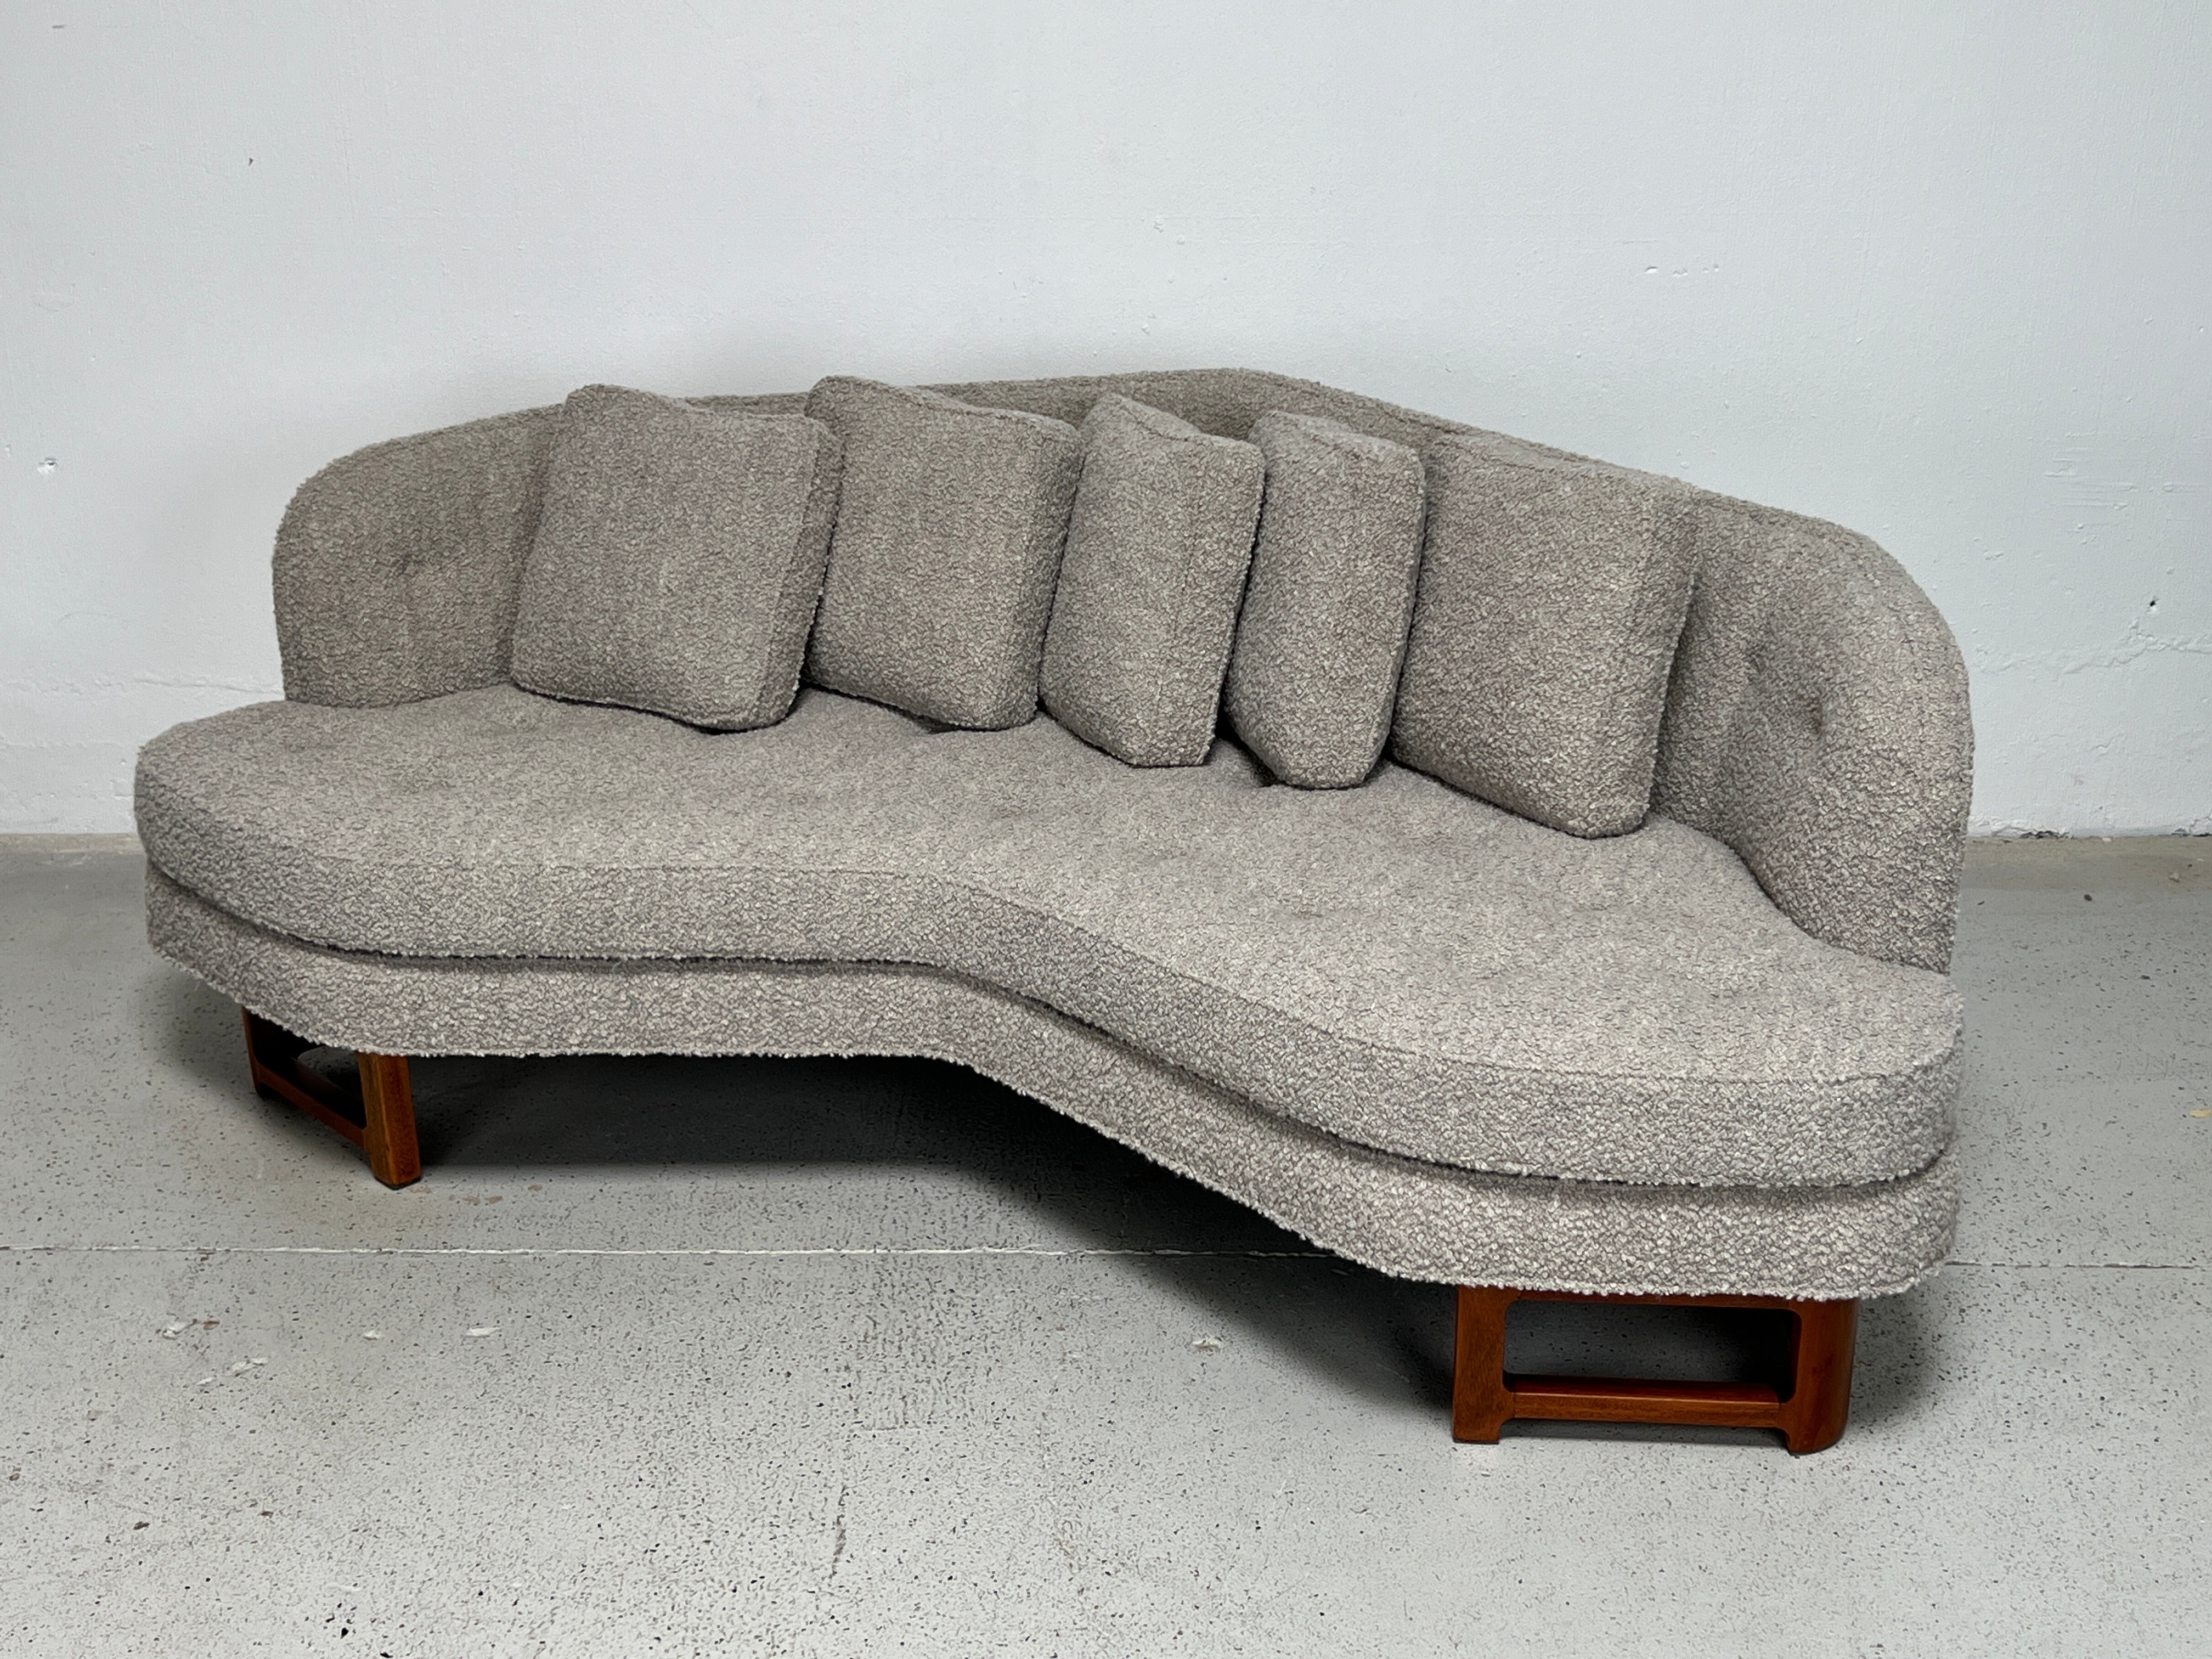  An angled sofa designed by Edward Wormley for Dunbar. Beautifully restored with refinished mahogany base and reupholstered in Holly Hunt / Terazzo / Silver Blue. New down pillows. 